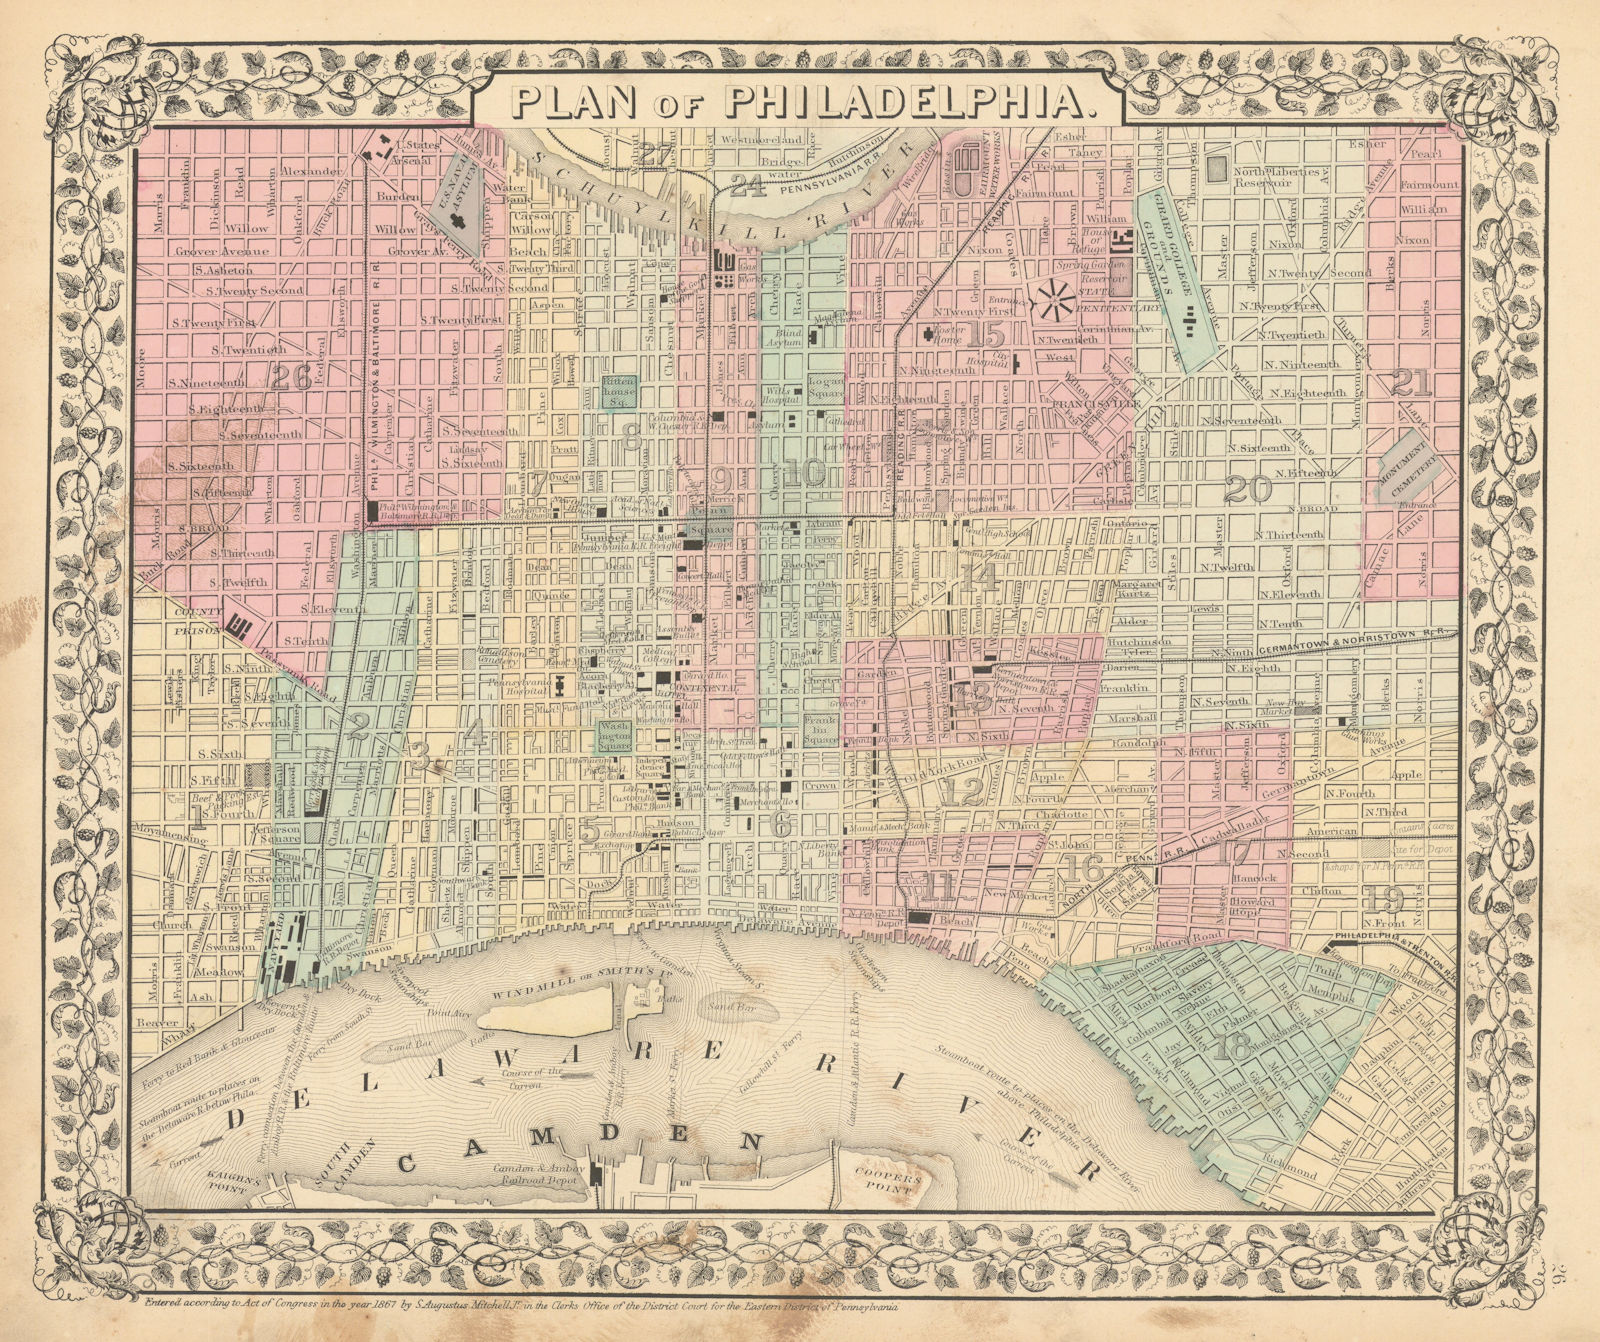 Associate Product City "Plan of Philadelphia" by Samuel Augustus Mitchell 1869 old antique map